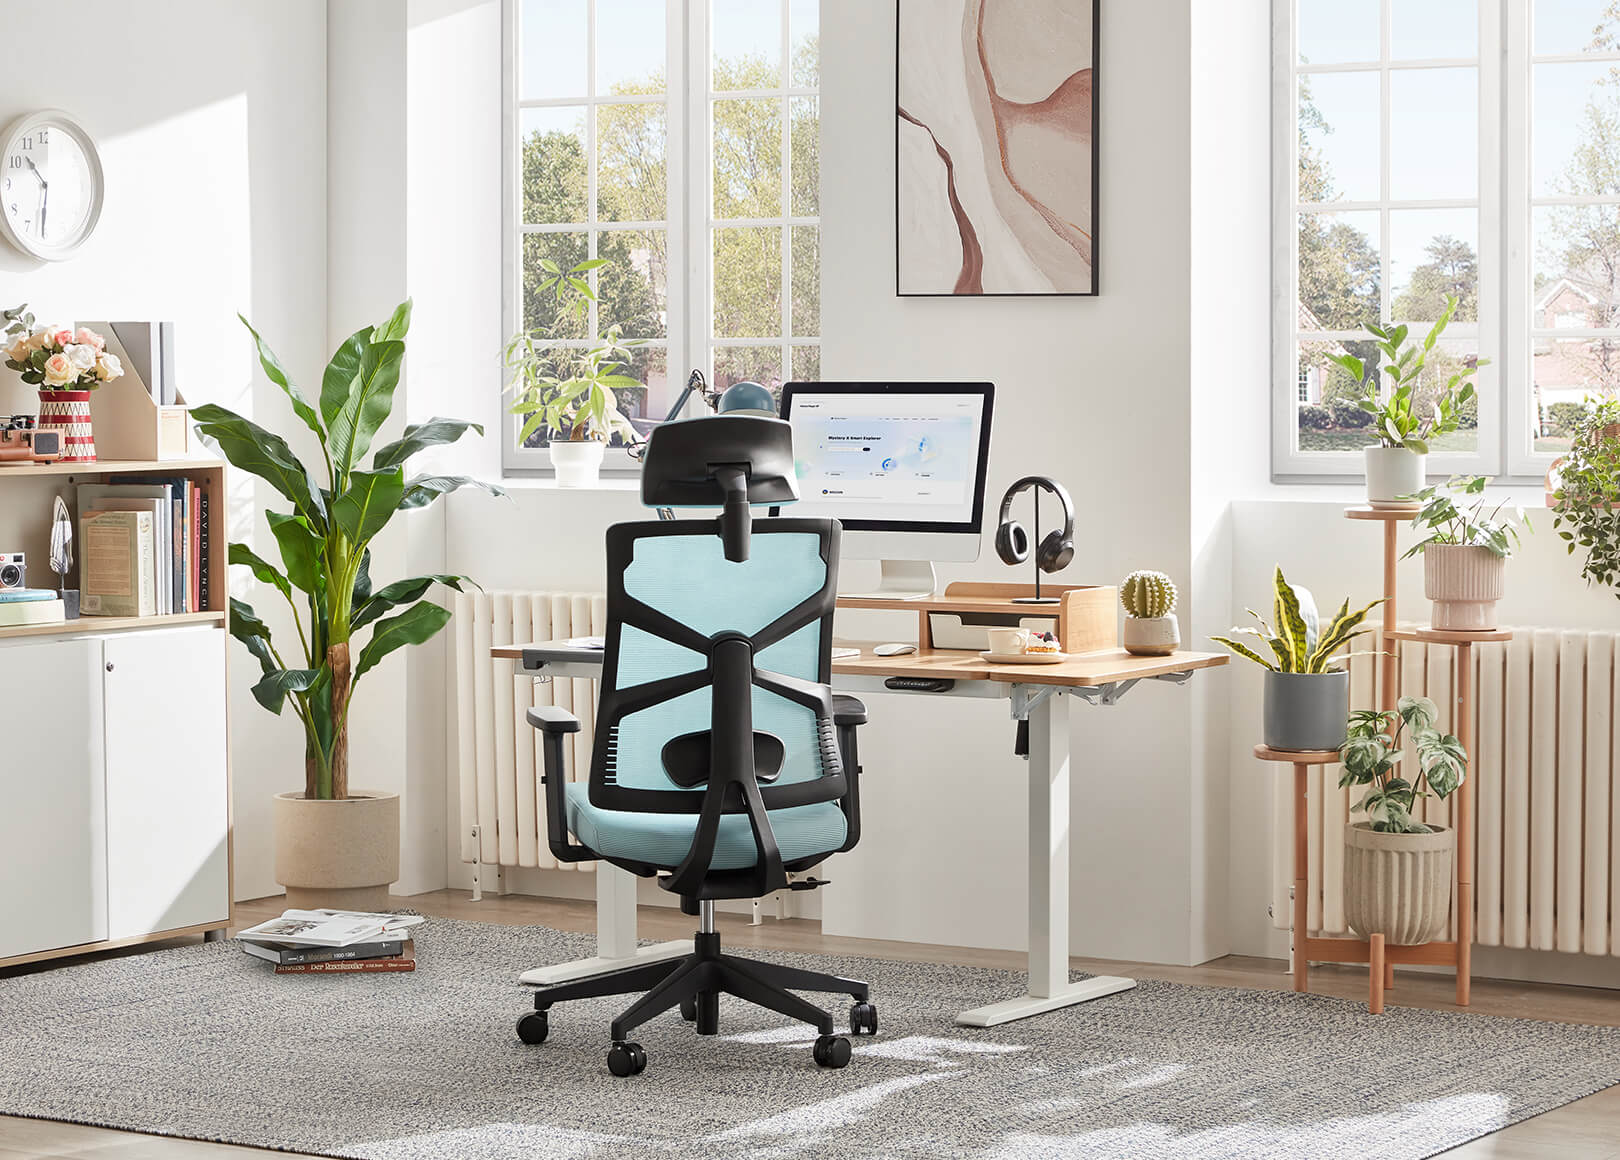 Cyan Voyager Pro Office Chair with Sturdy Backrest in Home Office Setting